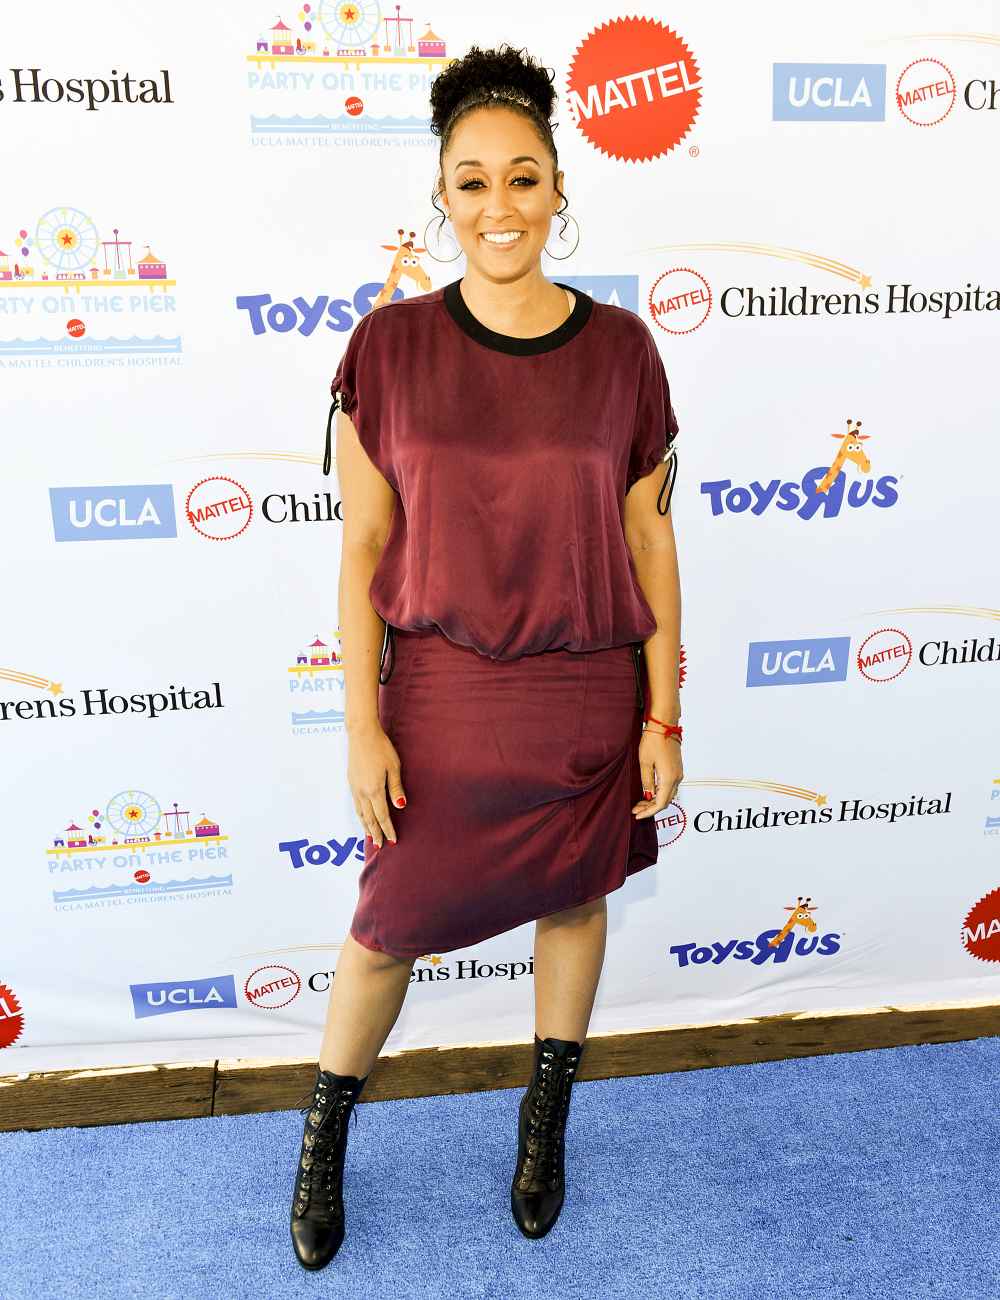 Tia Mowry attends the 18th Annual Mattel Party on the Pier at Pacific Park, on Santa Monica Pier on November 5, 2017 in Santa Monica, California.